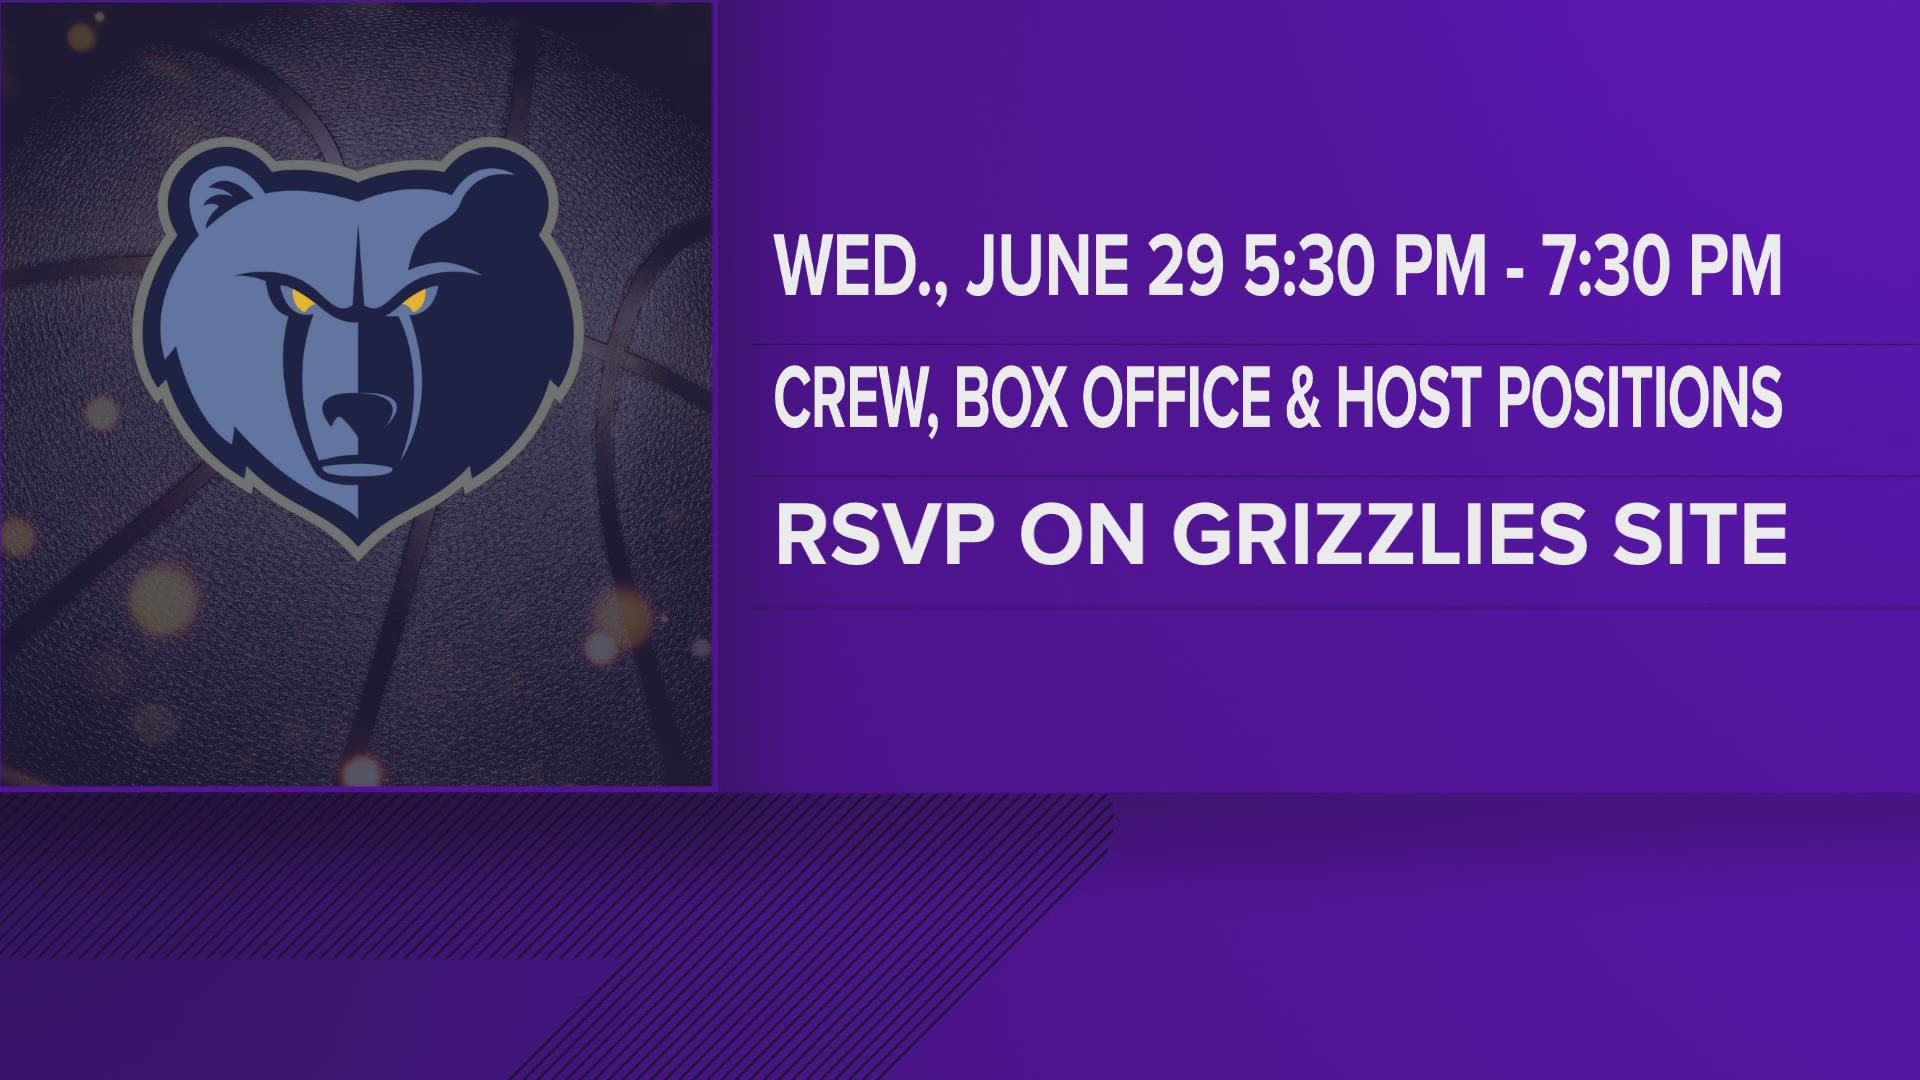 The event is set for 5:30-7:30 p.m. Wednesday, June 29, in the Grand Lobby of the FedExForum in Memphis.